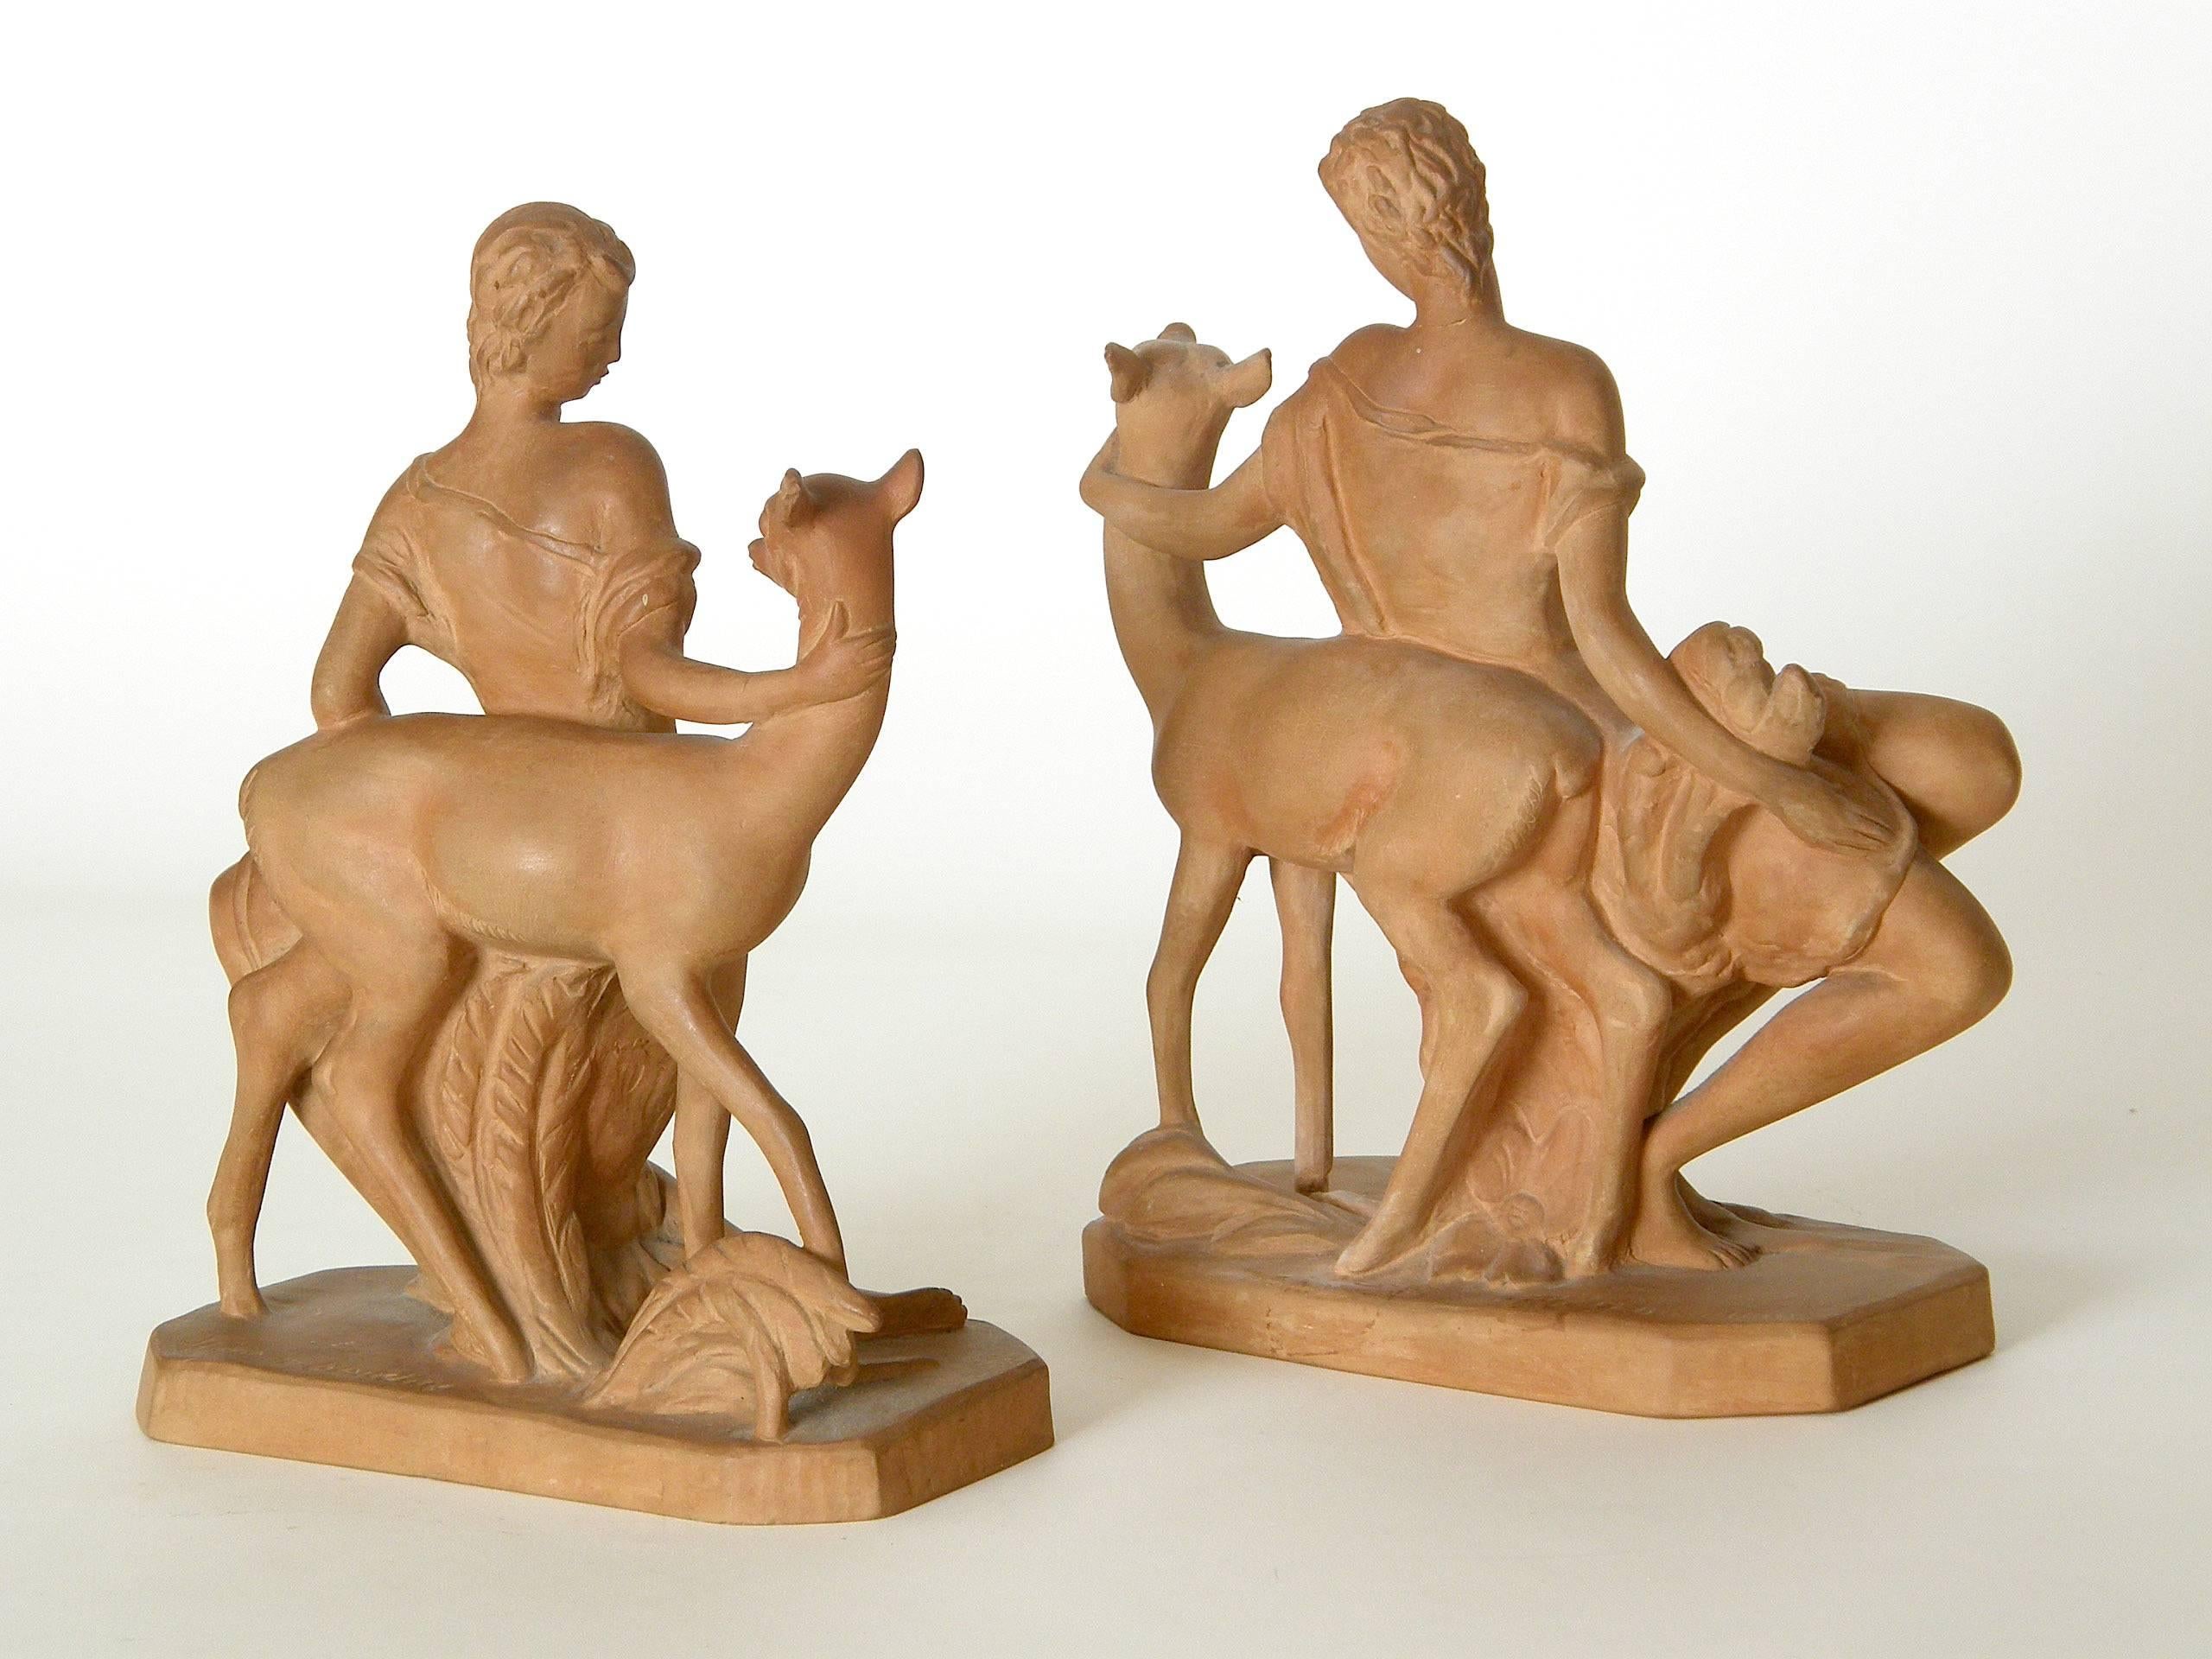 Classic and modern terracotta figures of women with deer sculpted by Mario Bandini for Zaccagnini, made in Italy.

Please contact us if you have any questions.